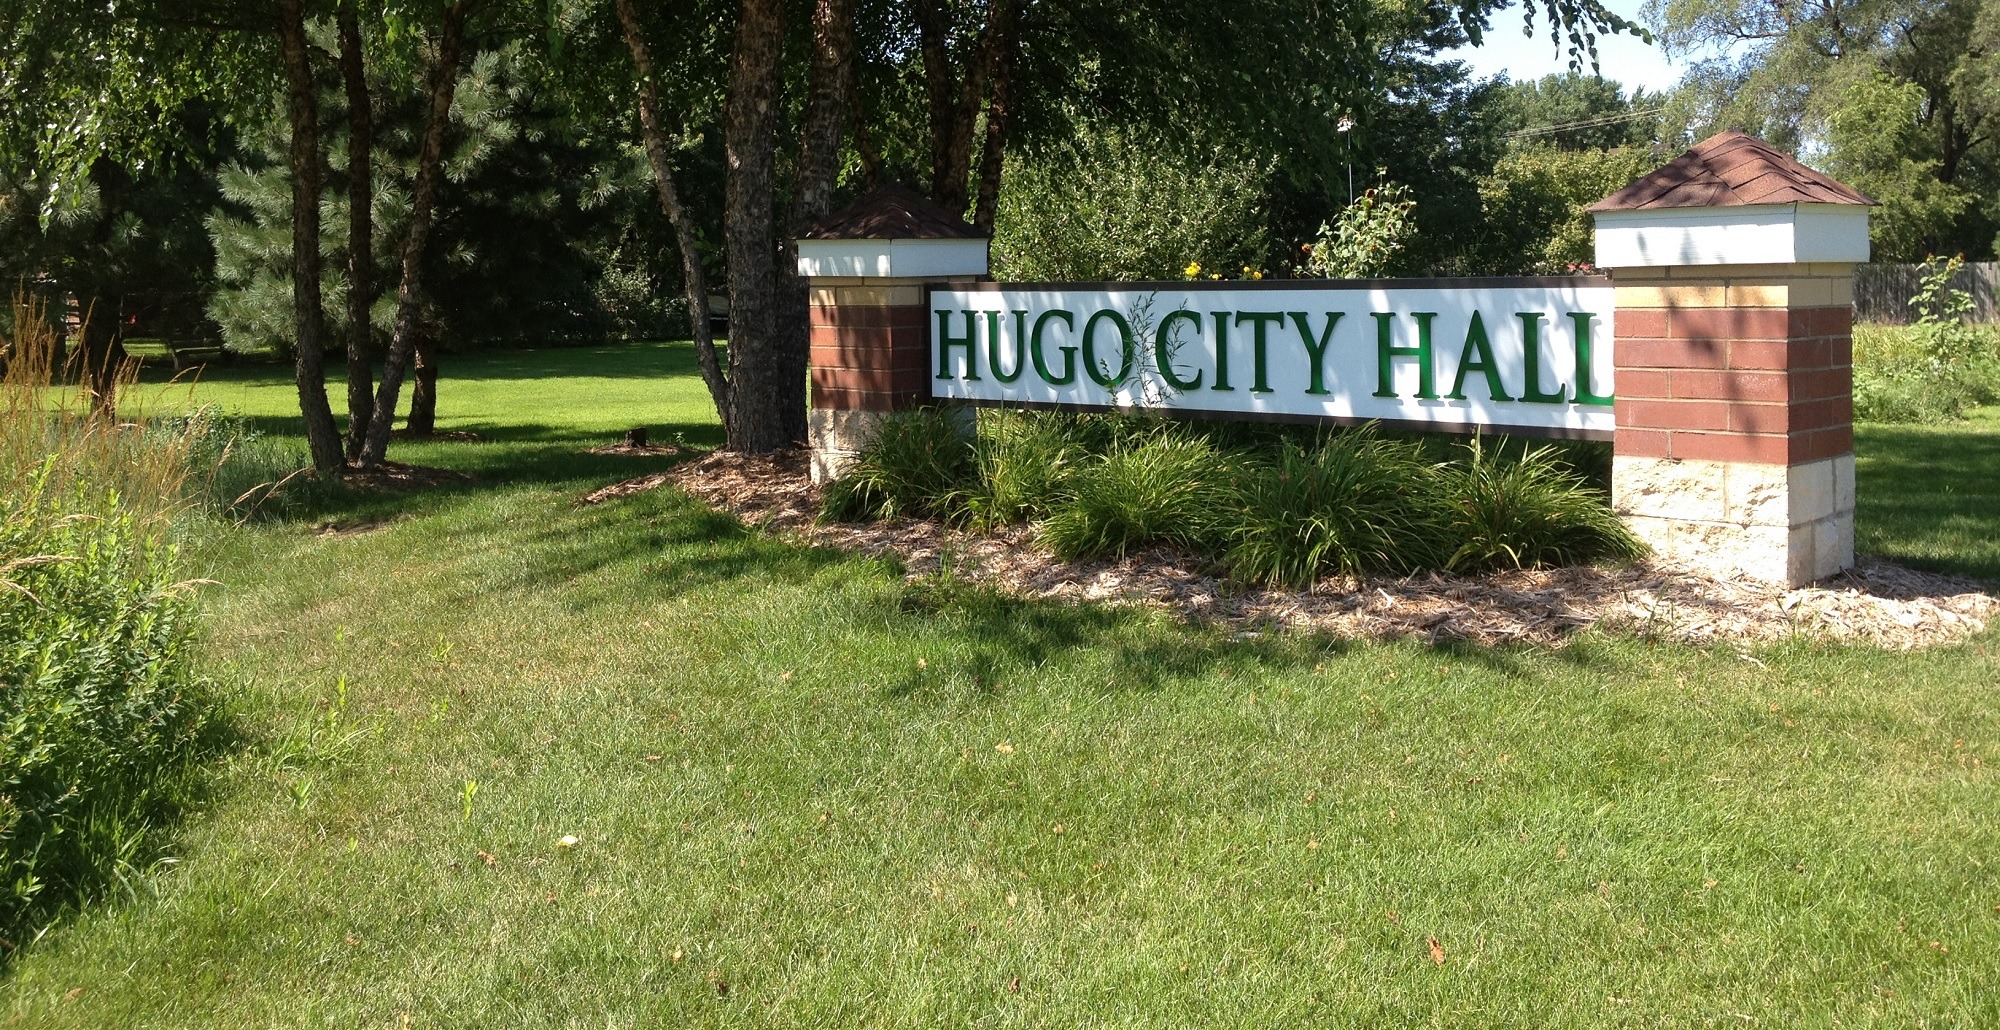 Hugo city hall sign with brick and signs and with bushes below the sign on a green lawn with trees in the background.